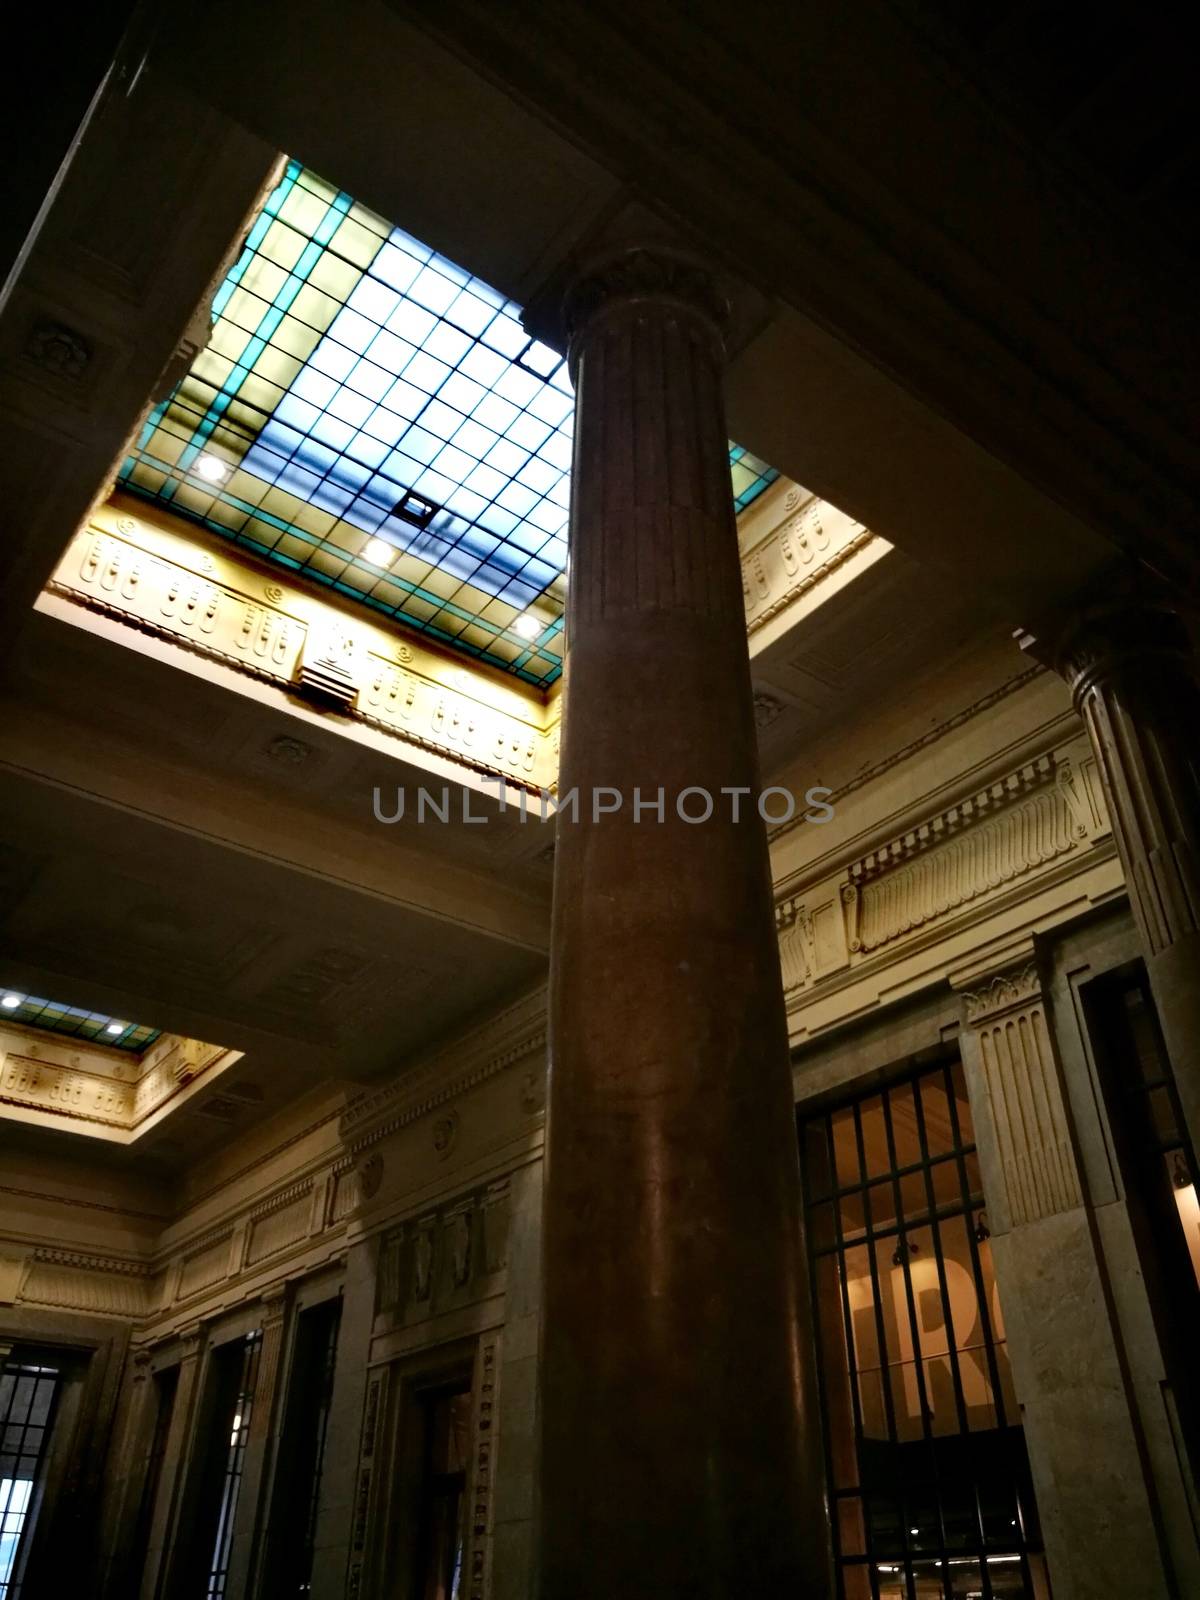 Architectural detail in Milan Central Station in Milan, Italy. Low angle view with dark shades and natural light from top.